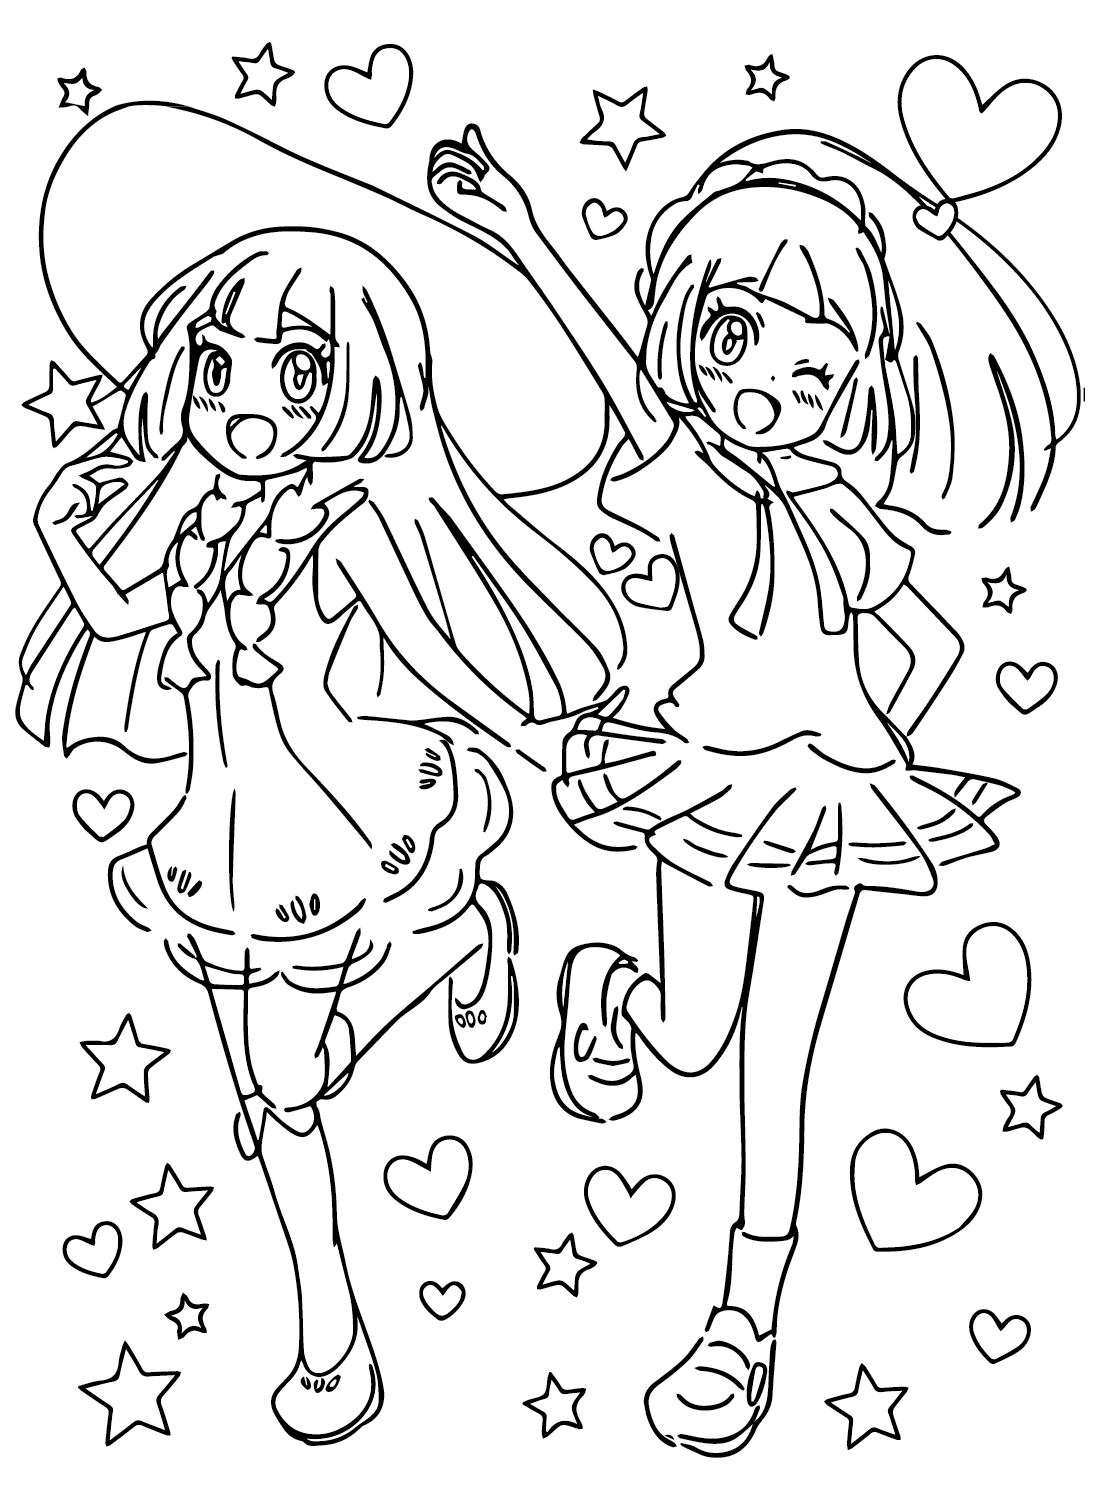 Lillie Pokemon Coloring Page PDF from Lillie Pokemon